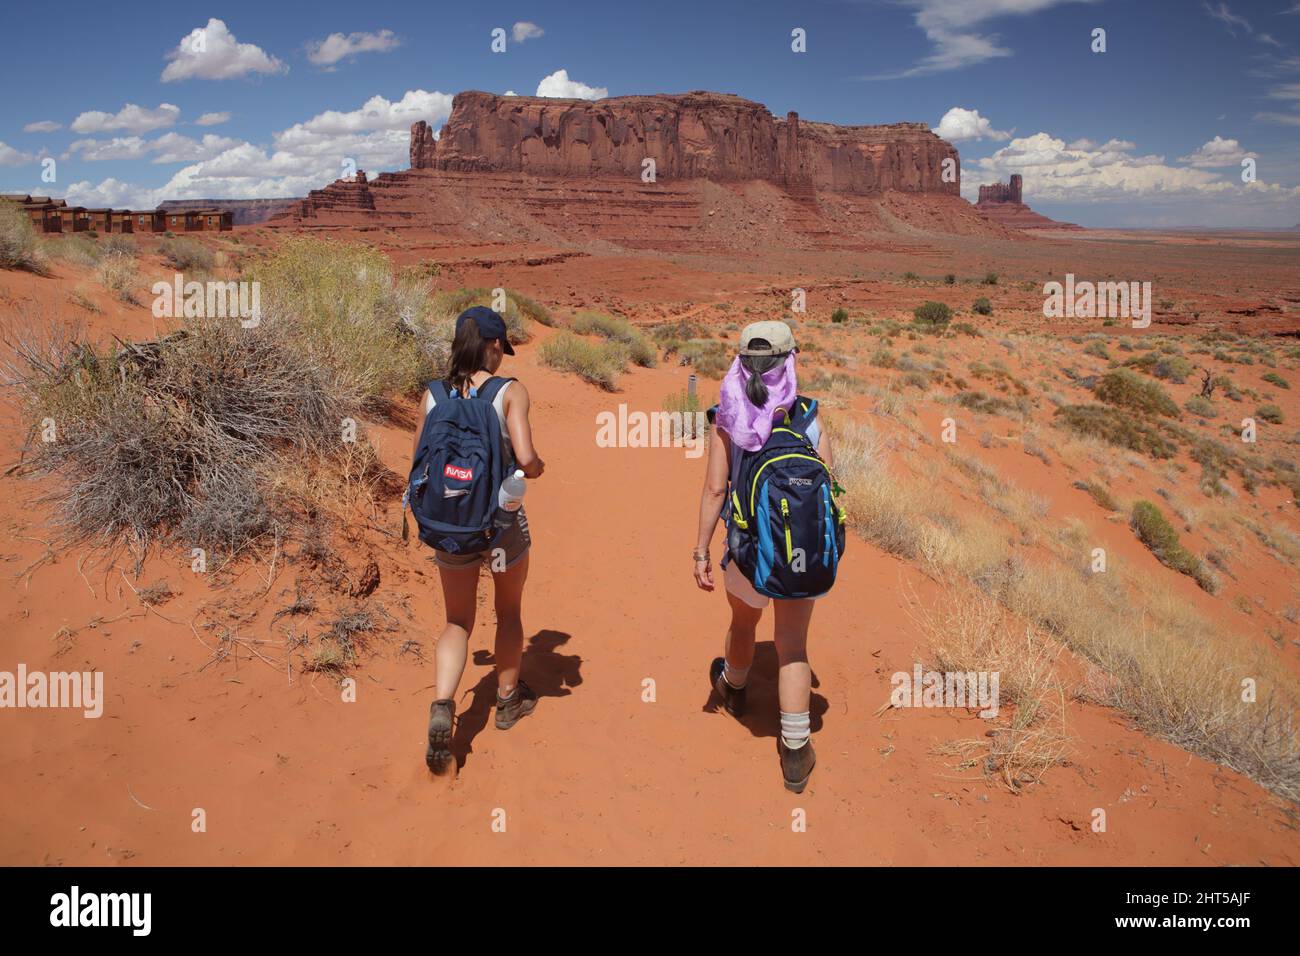 Hiking the Wildcat Trail in Monument Valley Navajo Tribal Park, USA. A hot august day with blue sky and sandstone cliffs, buttes, and pinnacles. Stock Photo